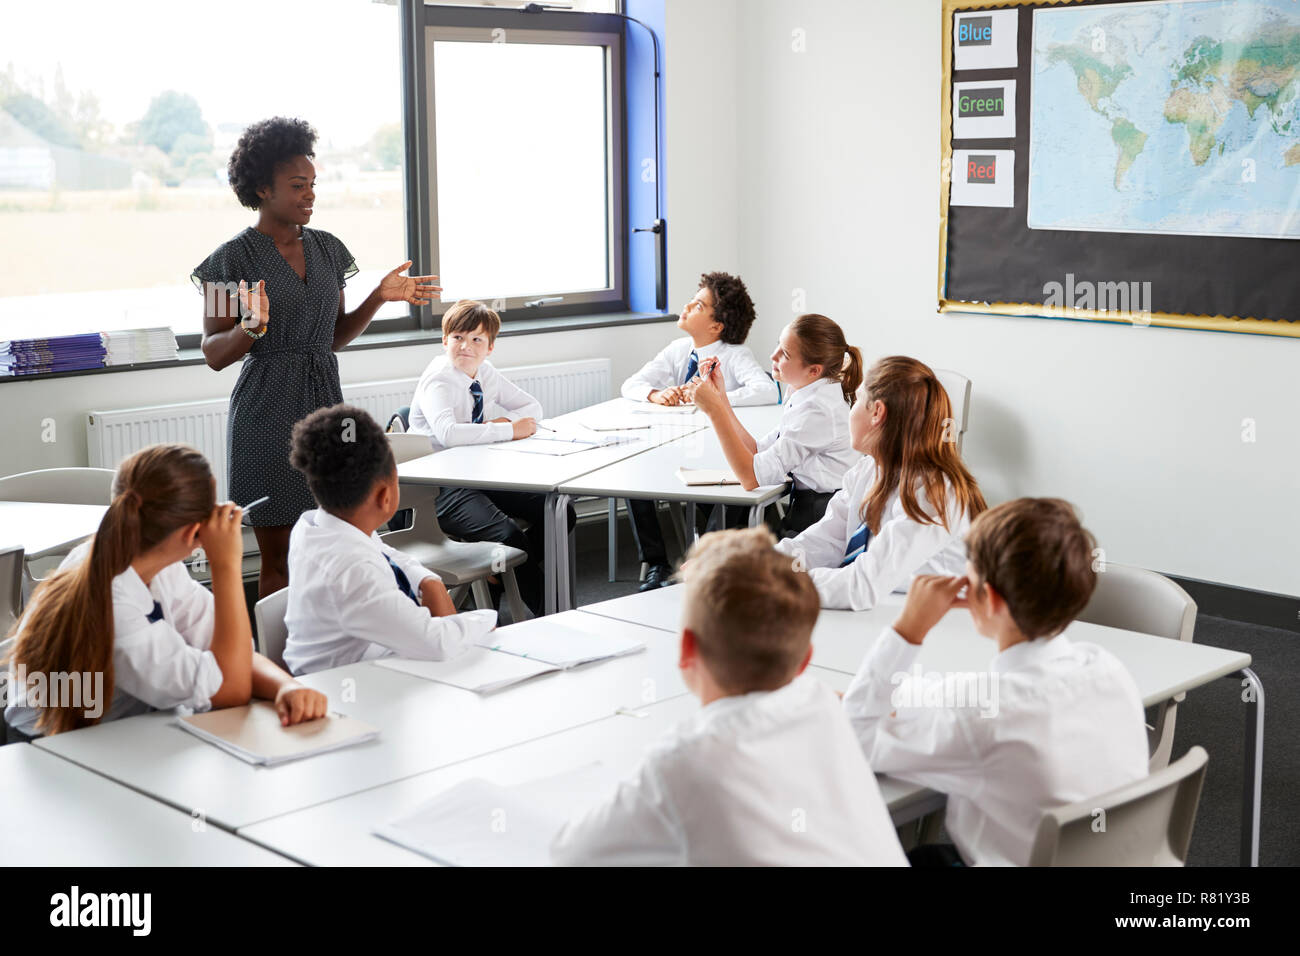 Female High School Tutor Standing By Tables With Students Wearing Uniform Teaching Lesson Stock Photo